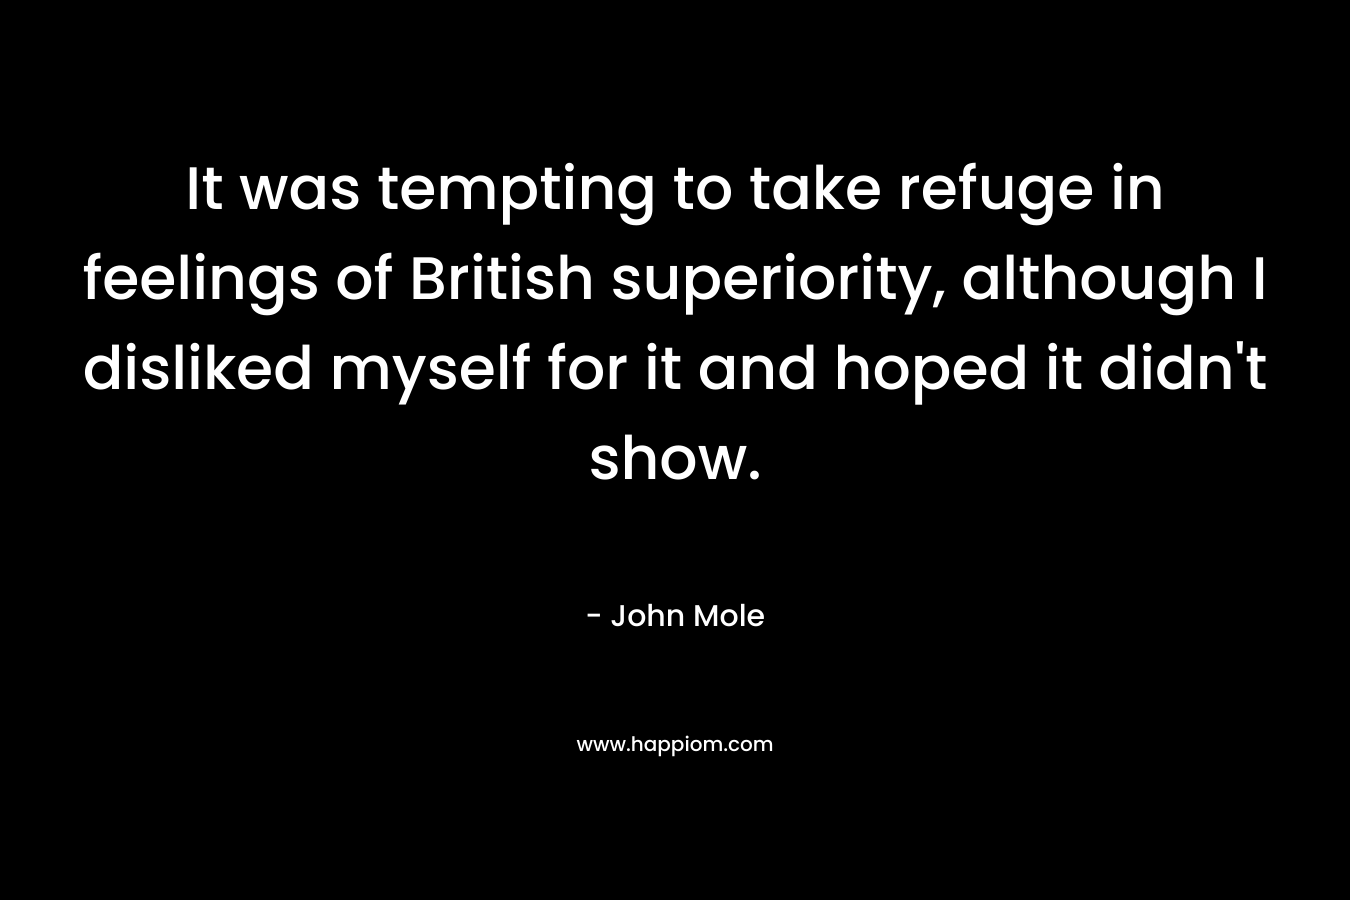 It was tempting to take refuge in feelings of British superiority, although I disliked myself for it and hoped it didn’t show. – John  Mole